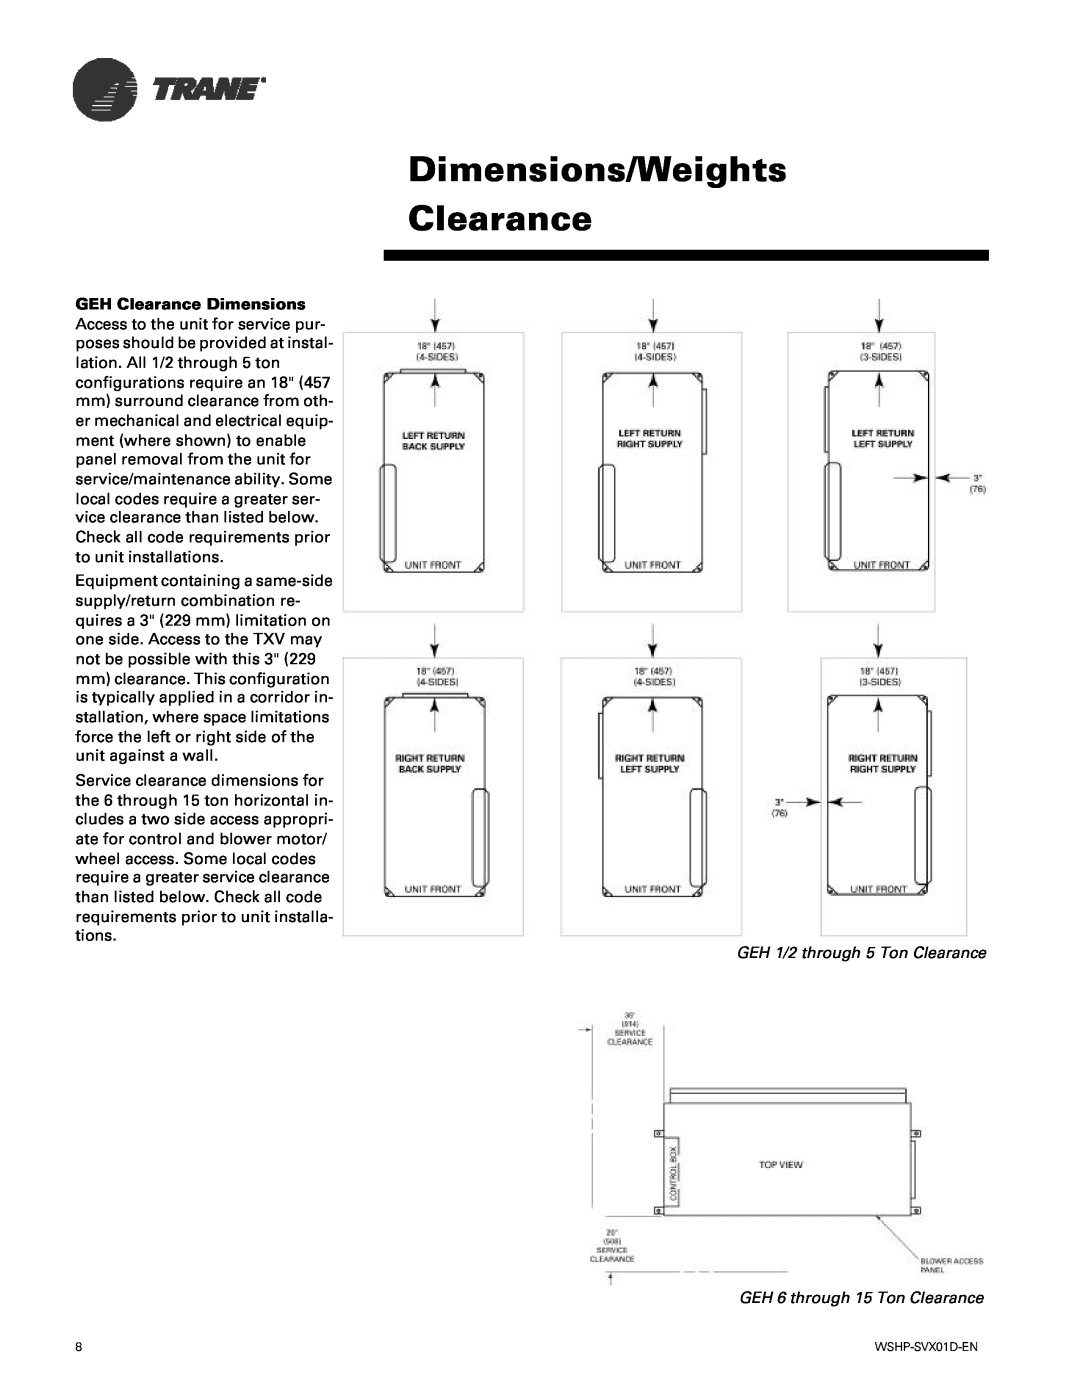 Trane GEV manual Dimensions/Weights Clearance, GEH 1/2 through 5 Ton Clearance, GEH 6 through 15 Ton Clearance 